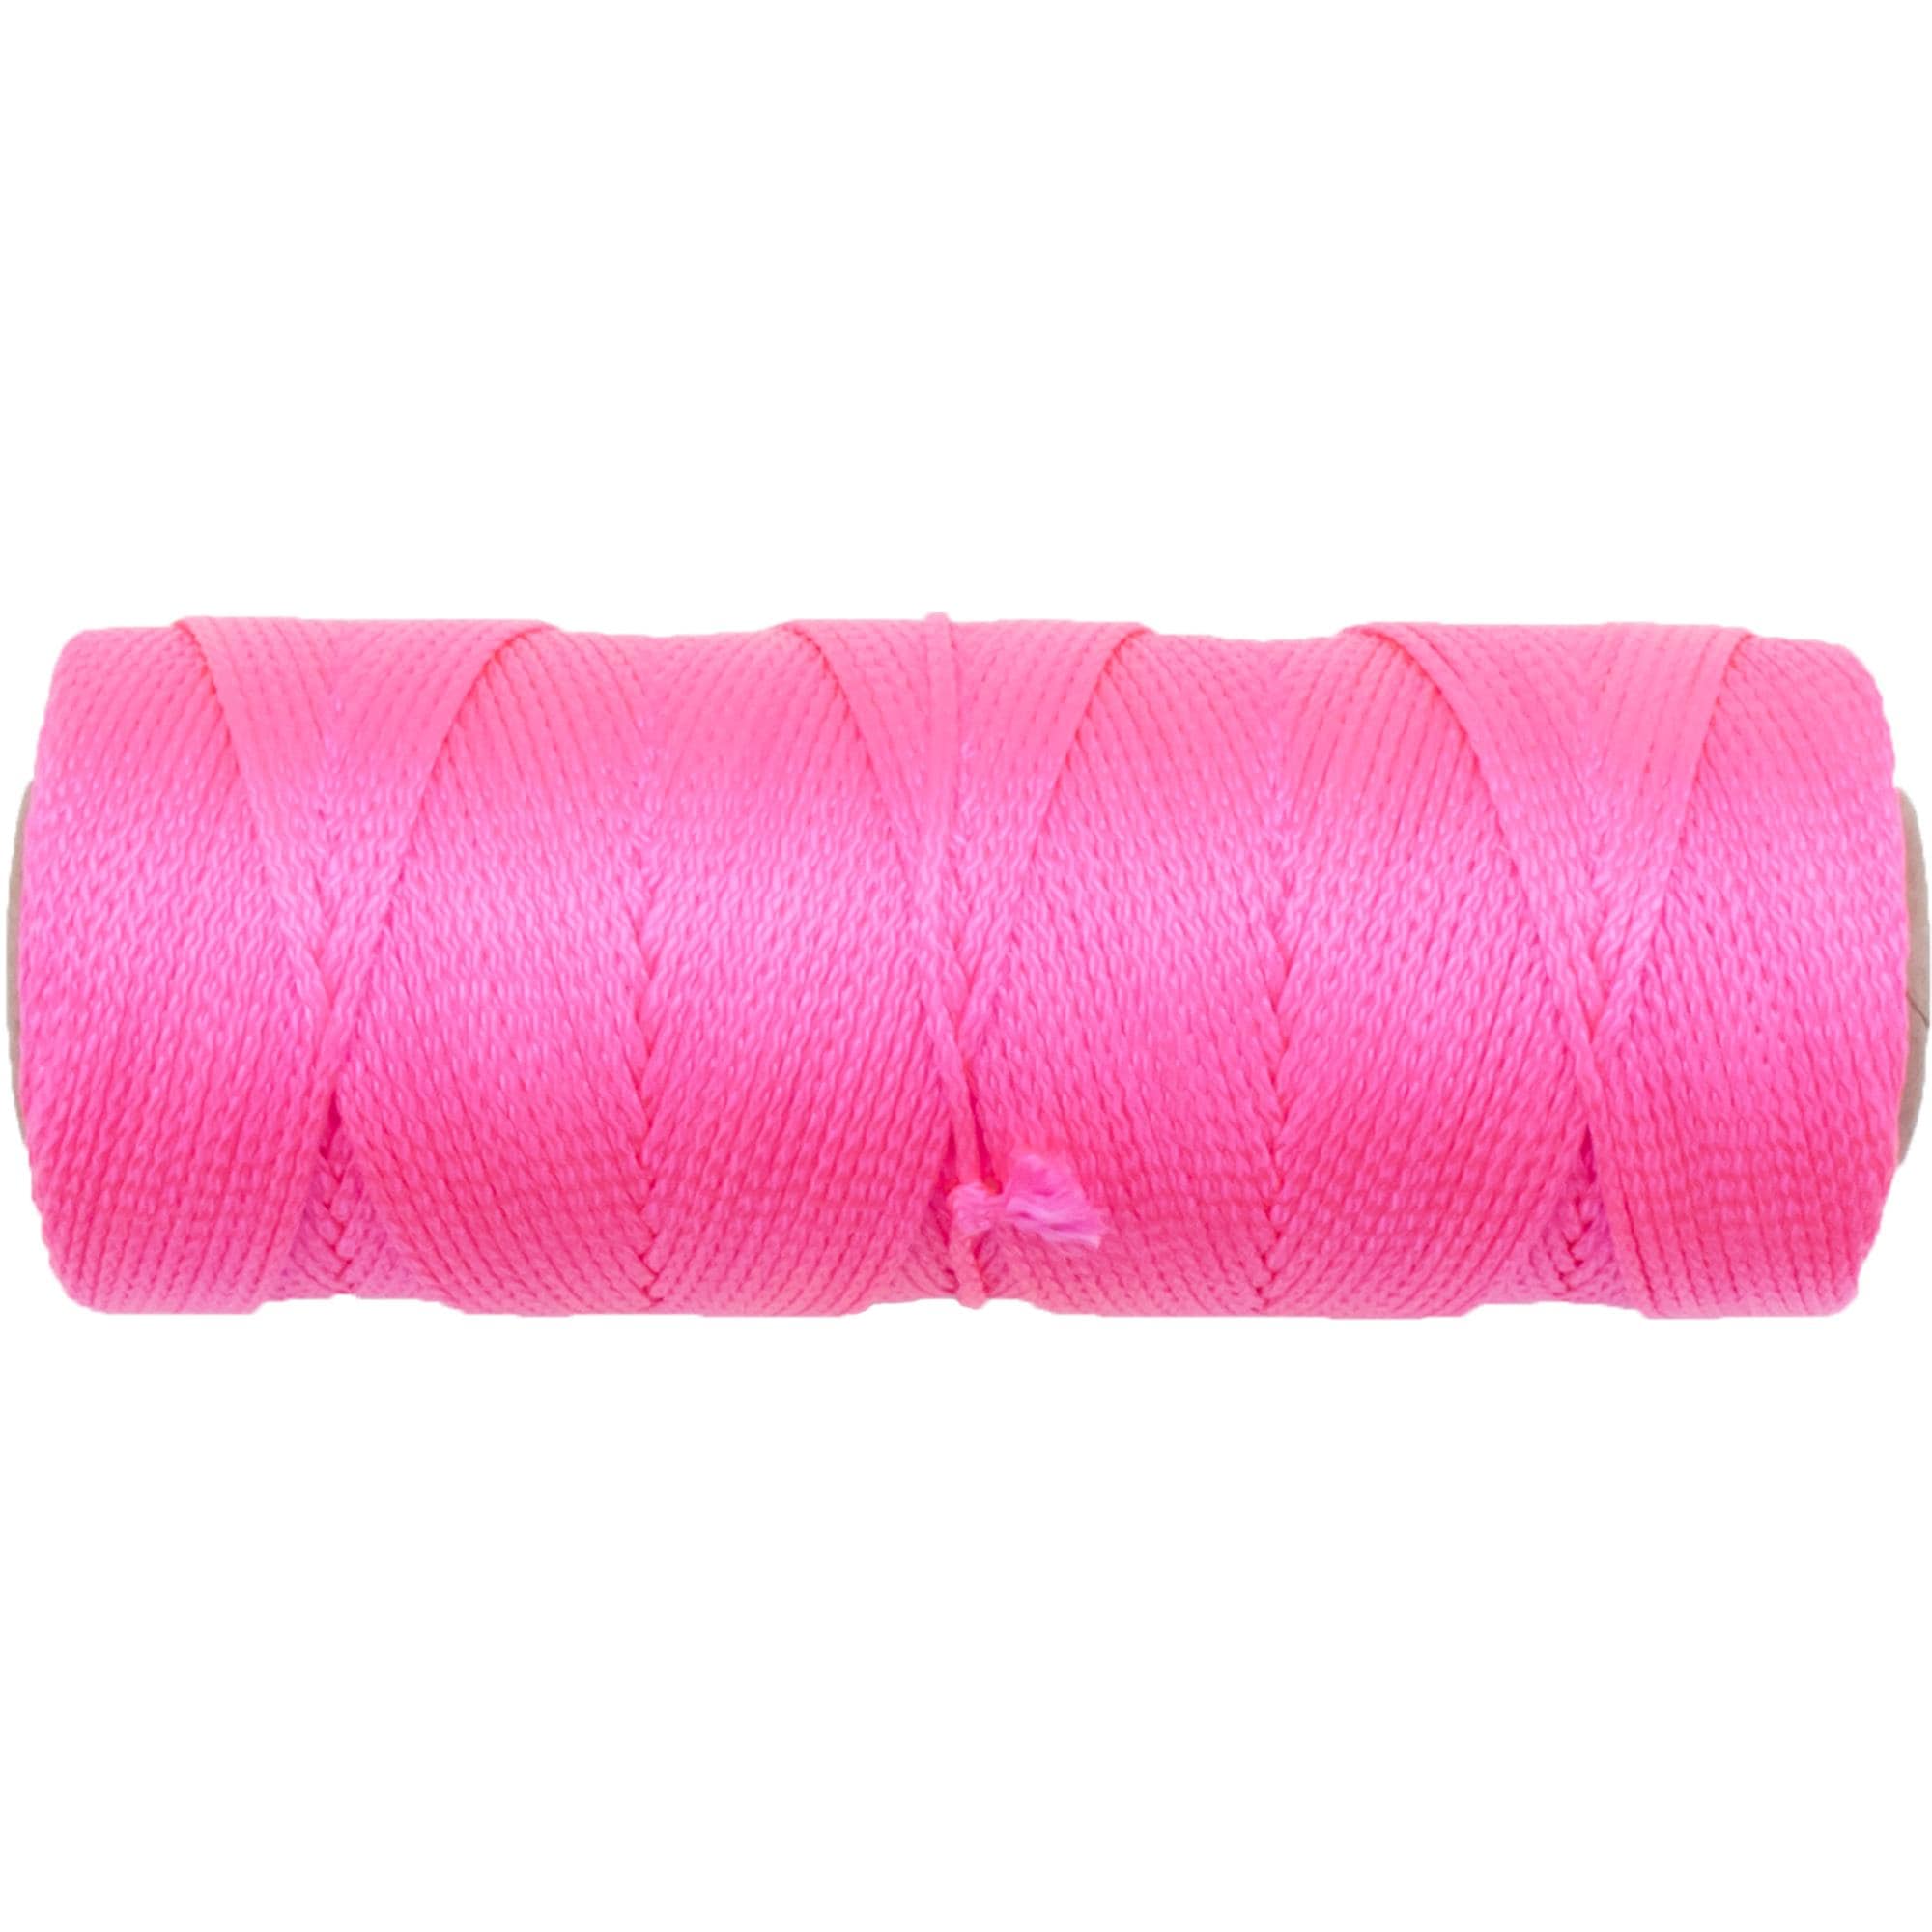 Stringliner Mason String Line Replacement Roll – Fluorescent